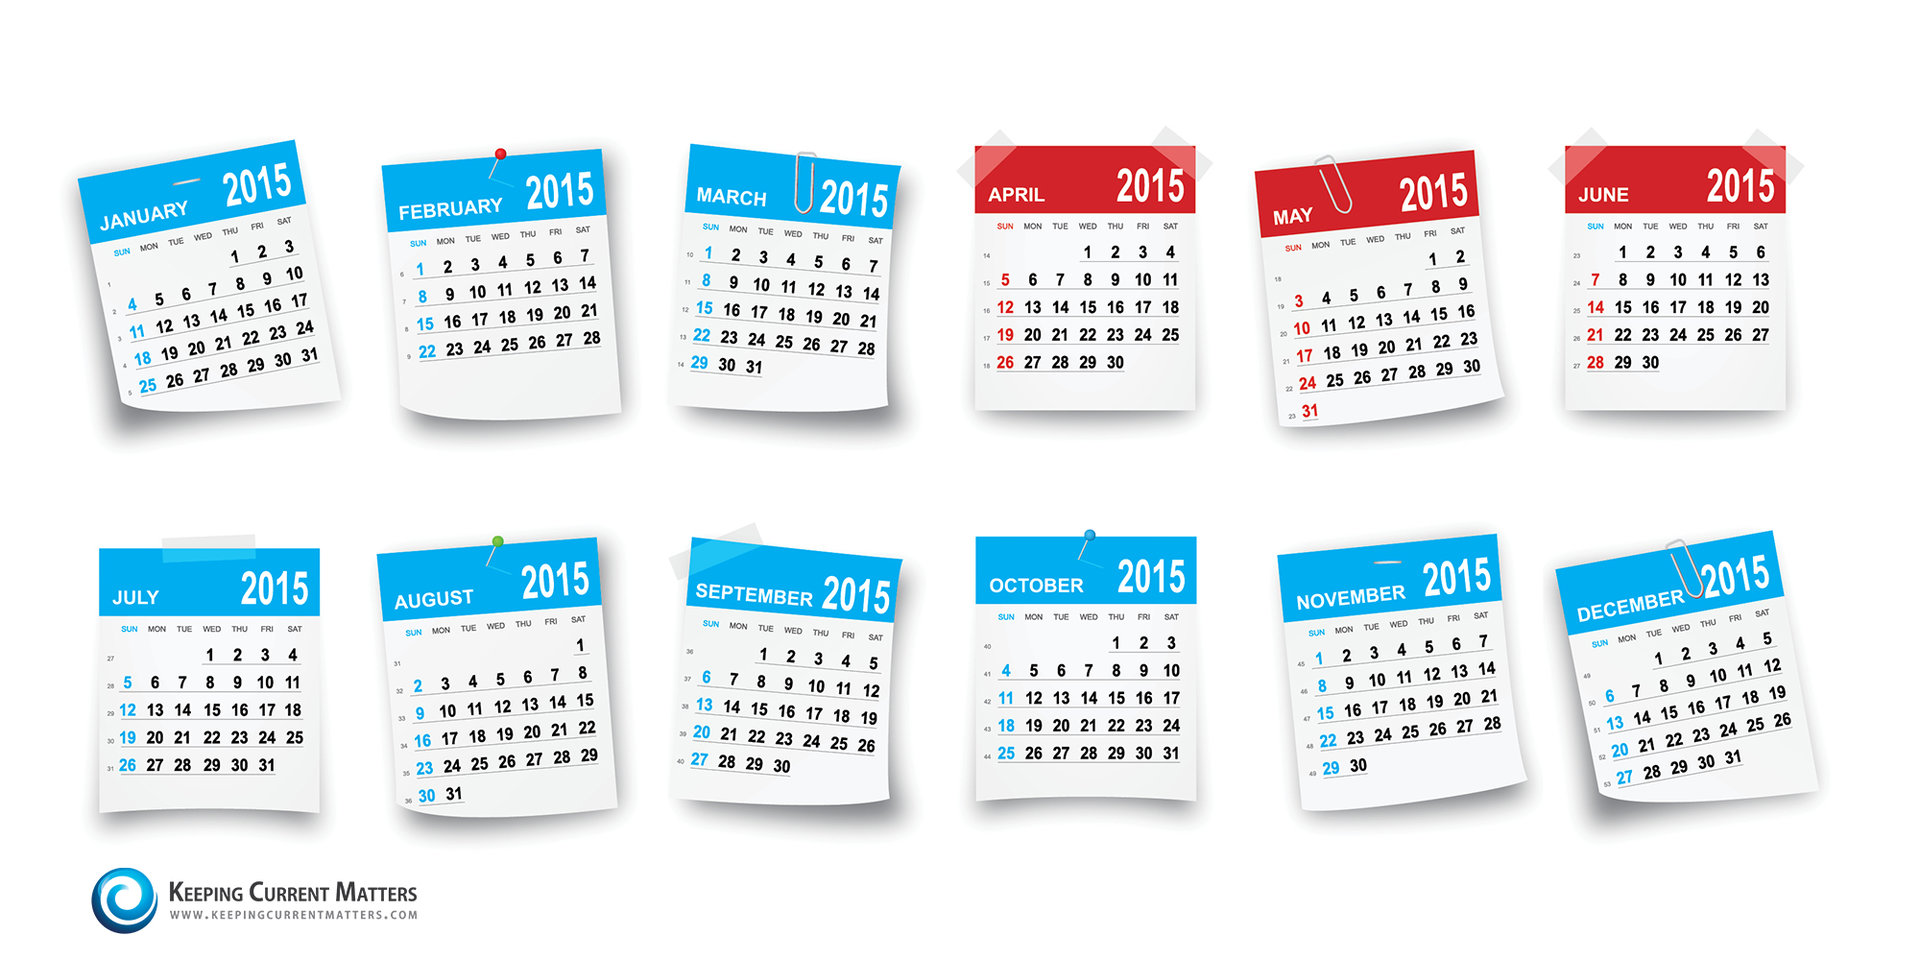 2015 Popular Selling Months | Keeping Current Matters